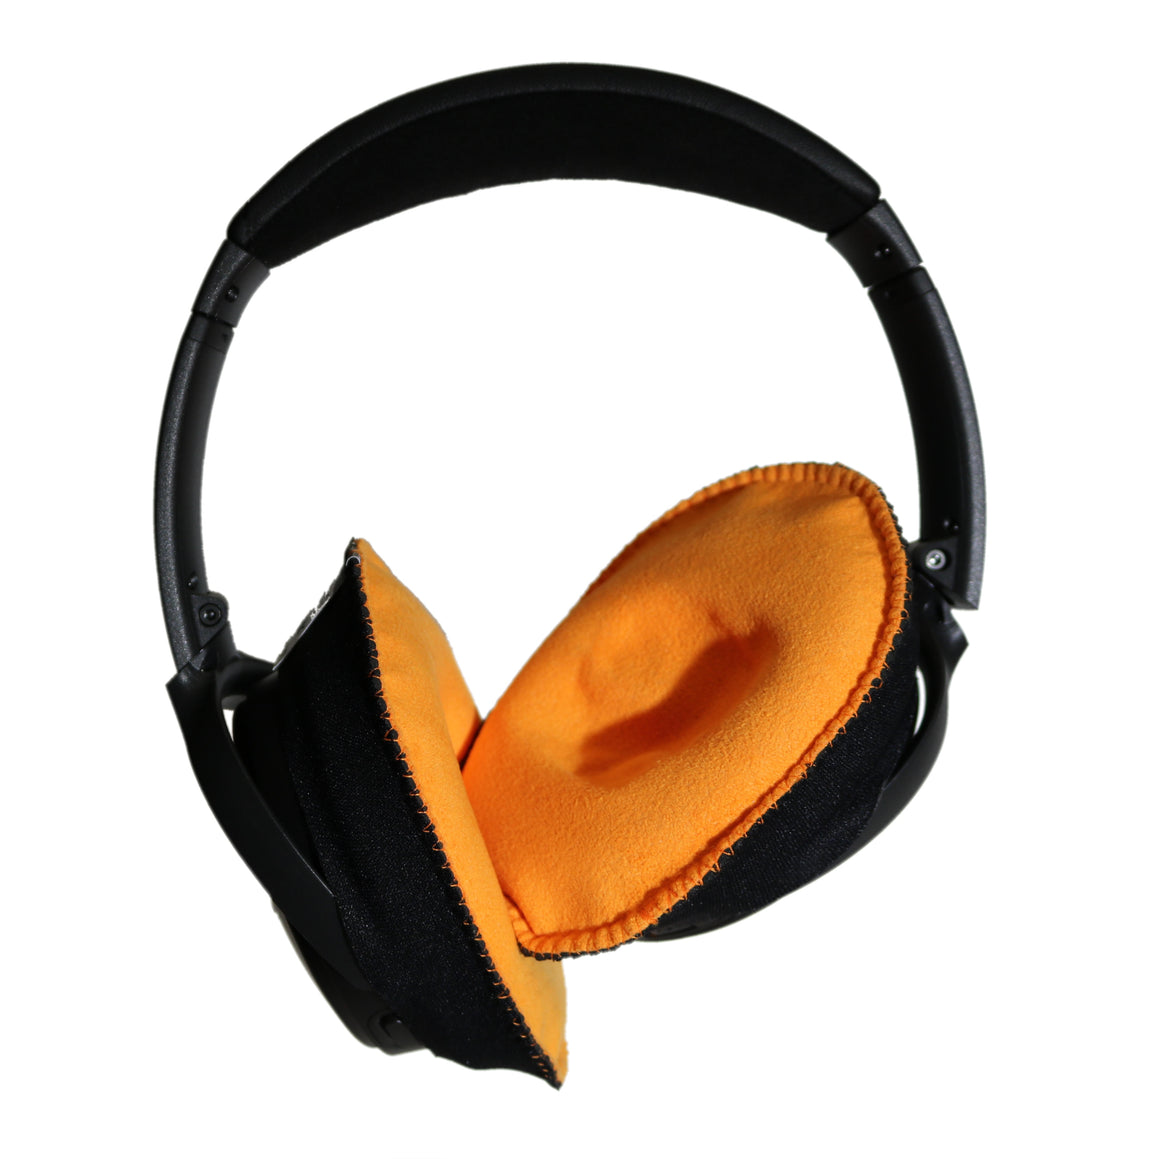 CanSkins for Bose Quiet Comfort